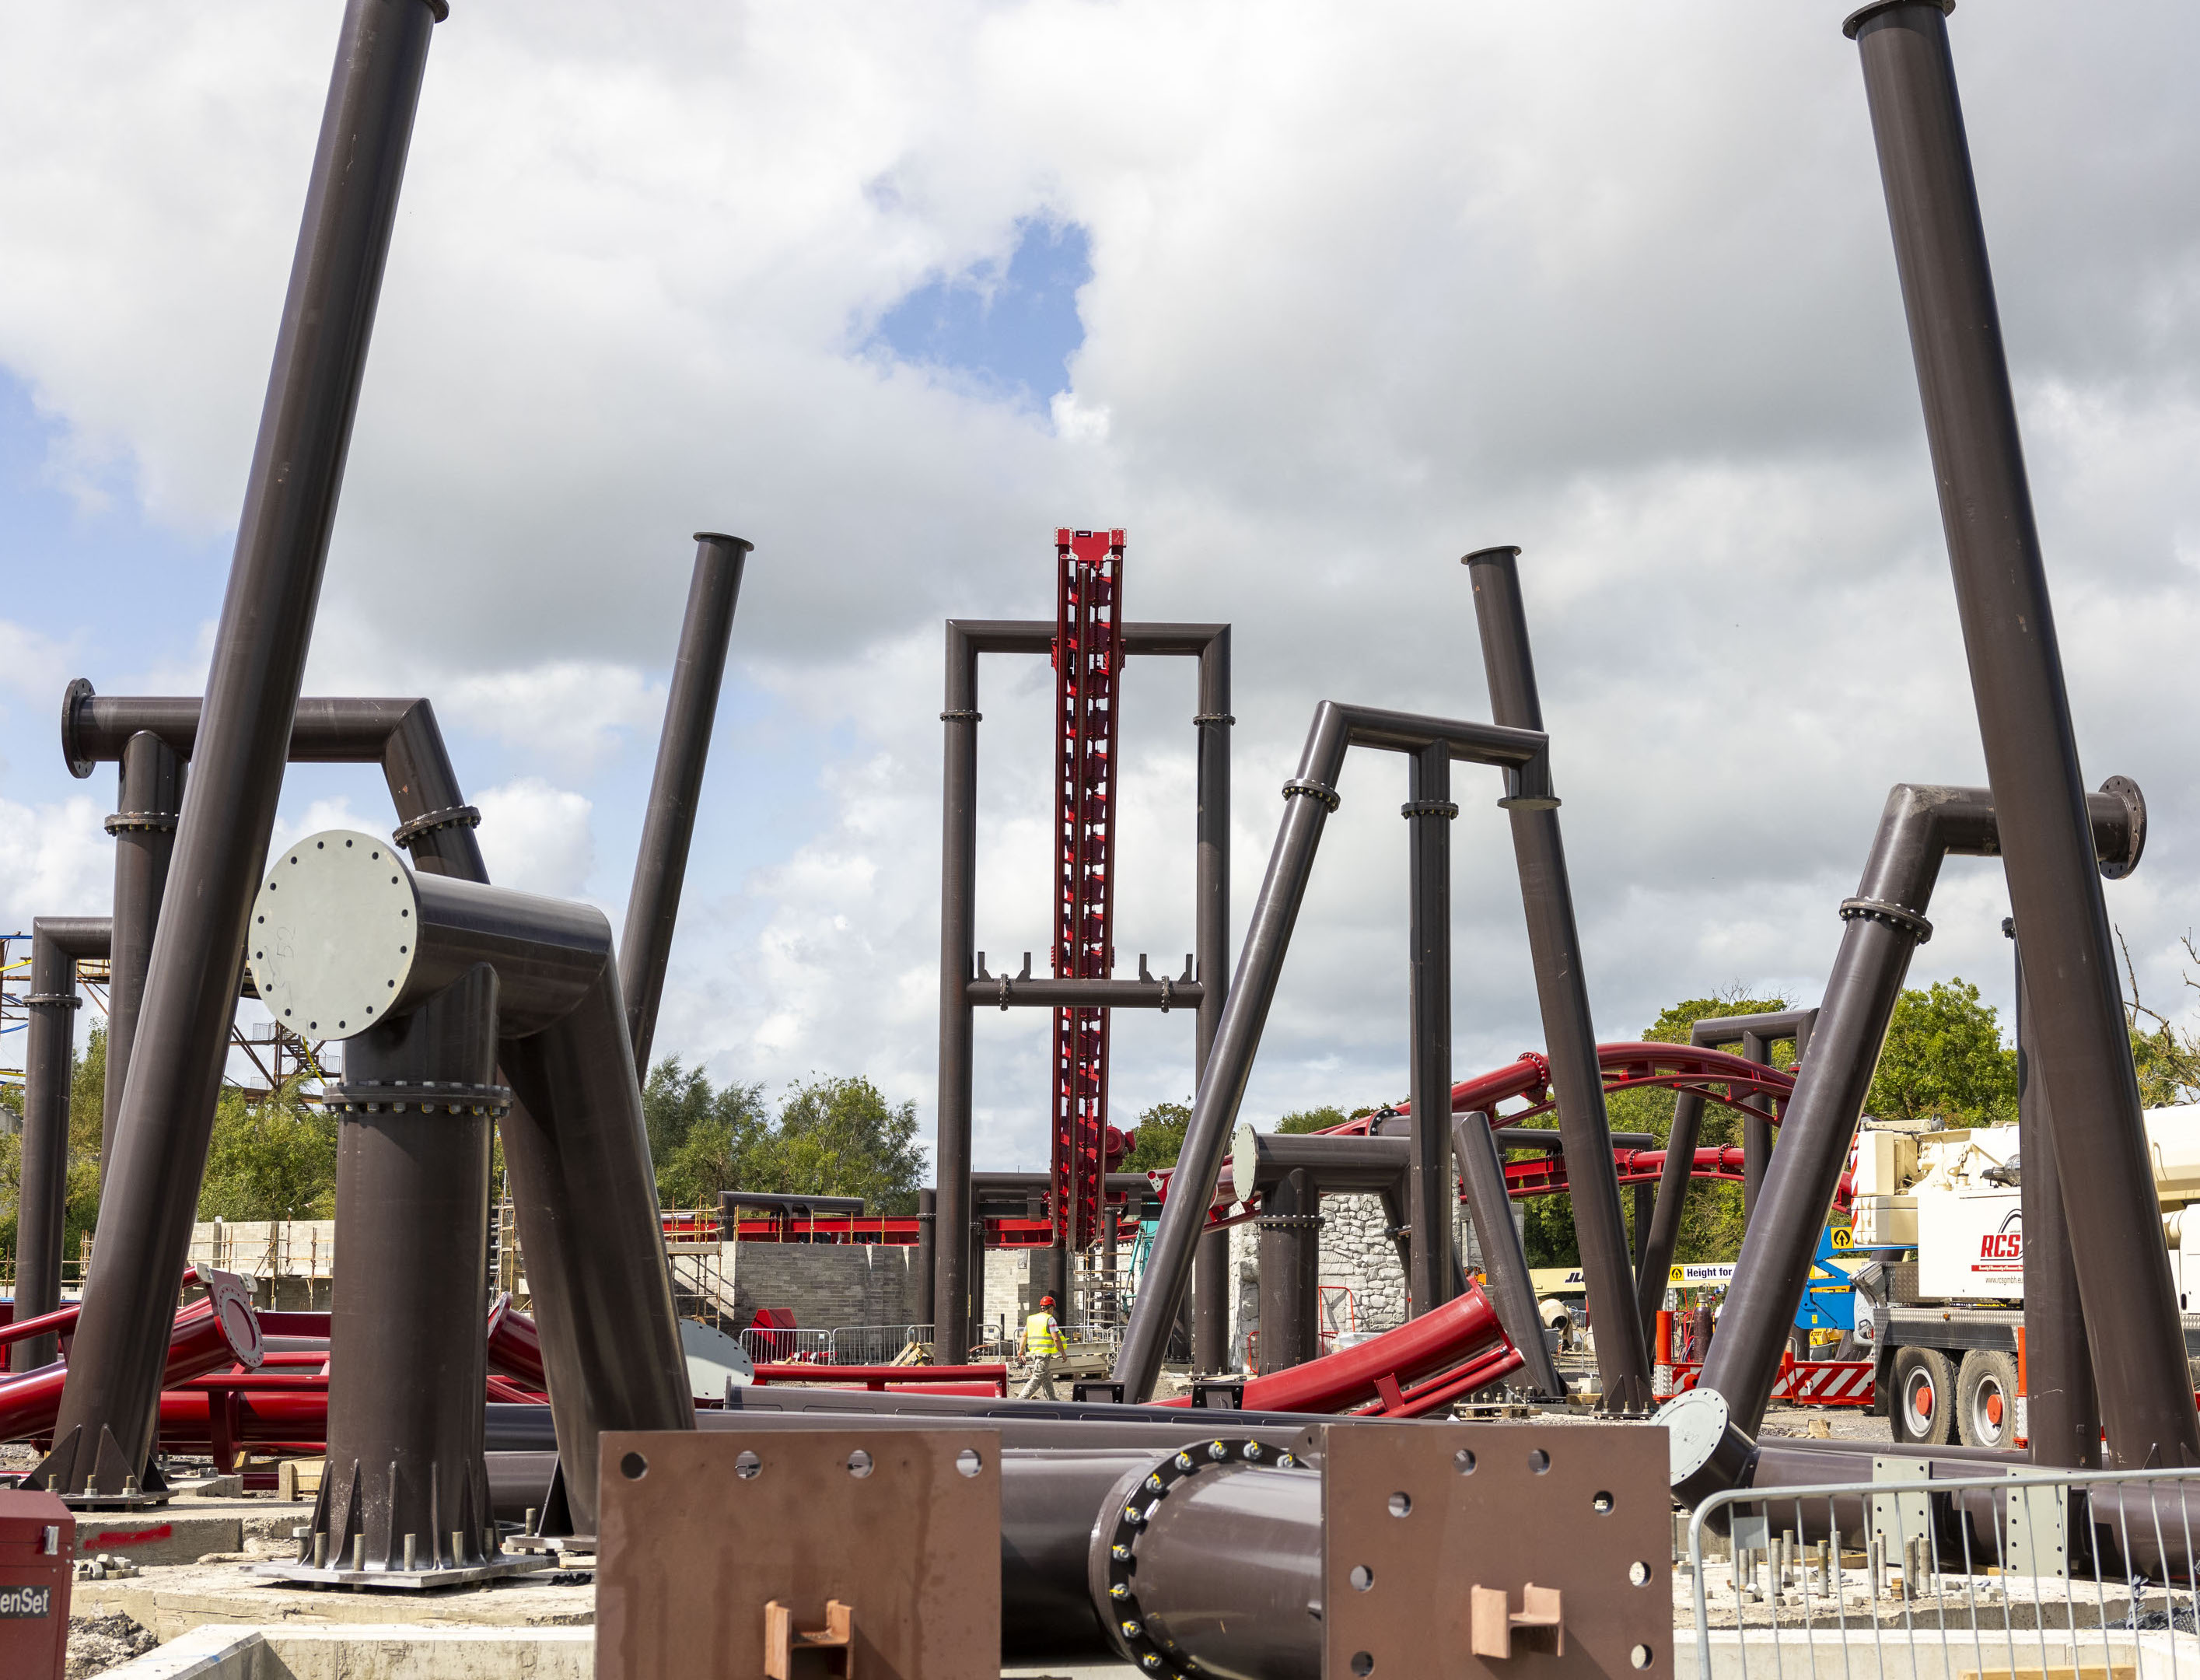 a red rollercoaster track being built. A section of the track lift hill can be seen.